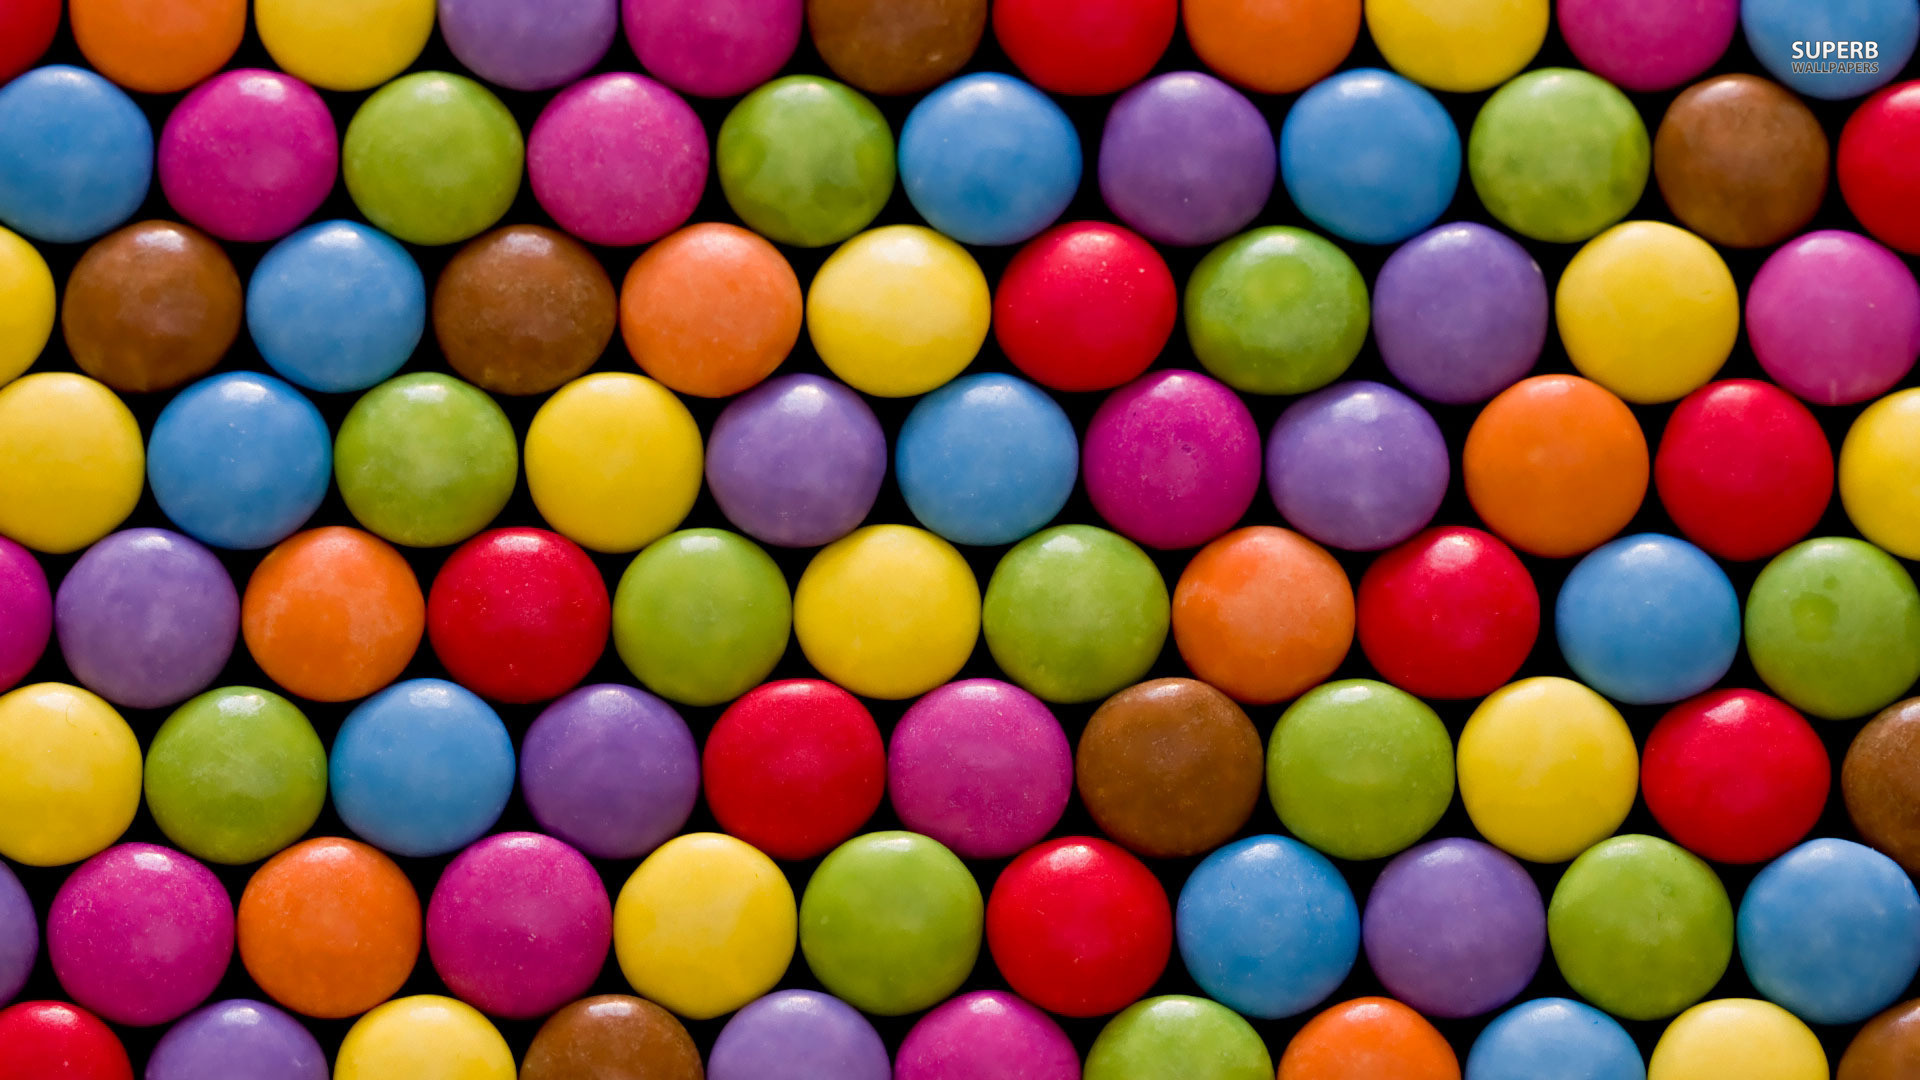 1920x1080 Candy Images #1023038